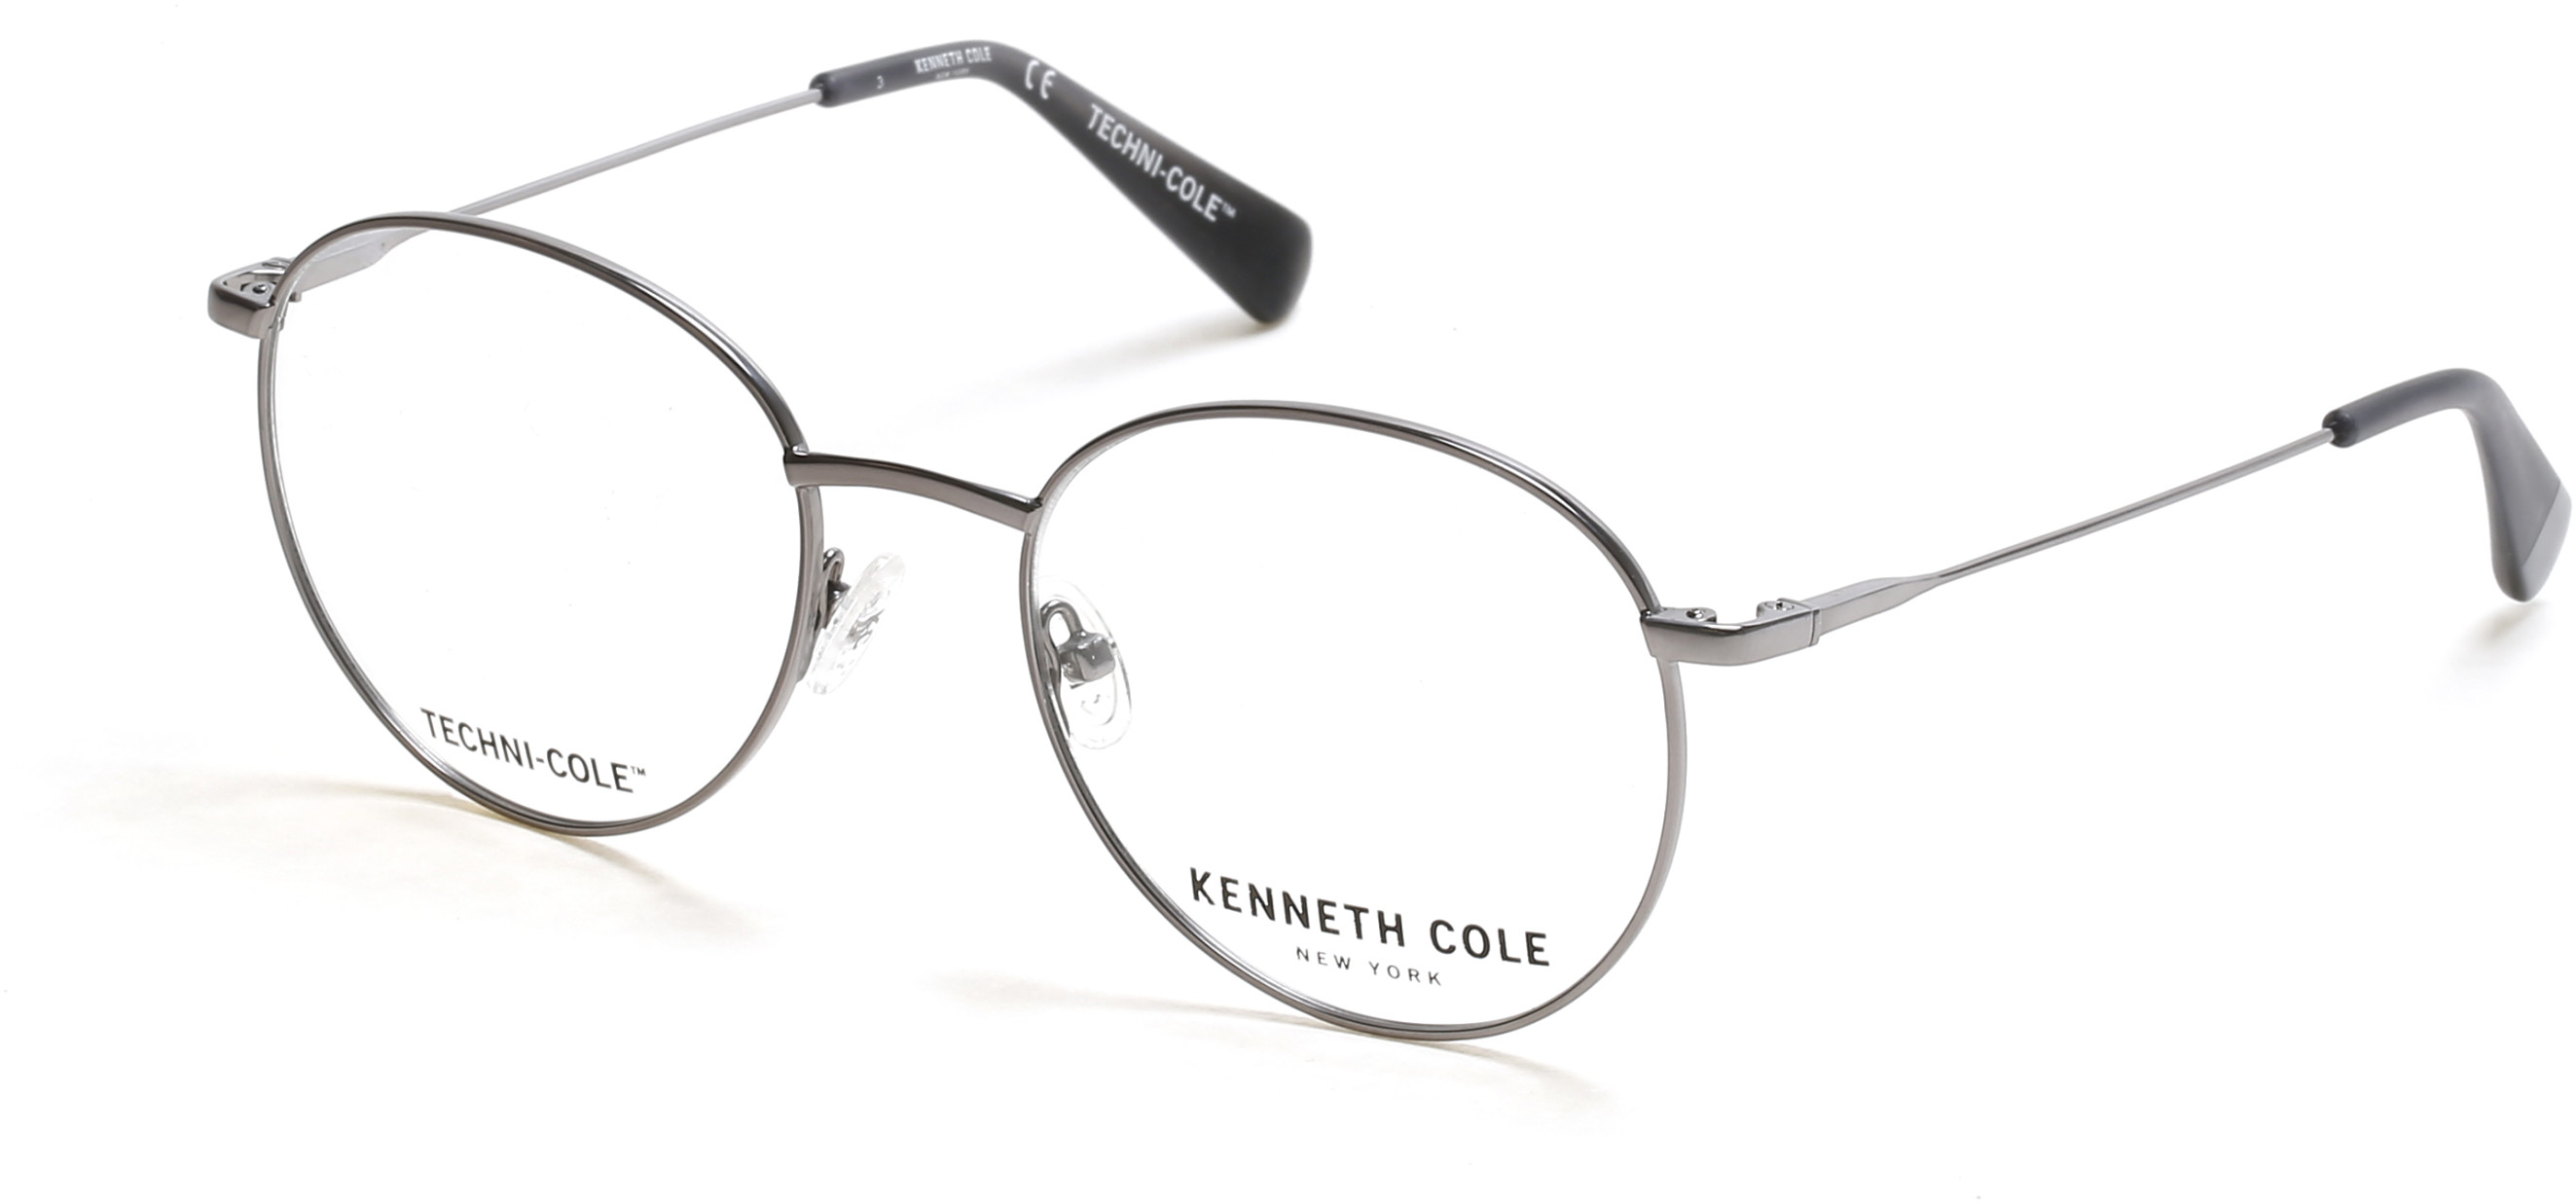 KENNETH COLE NY 0332 009